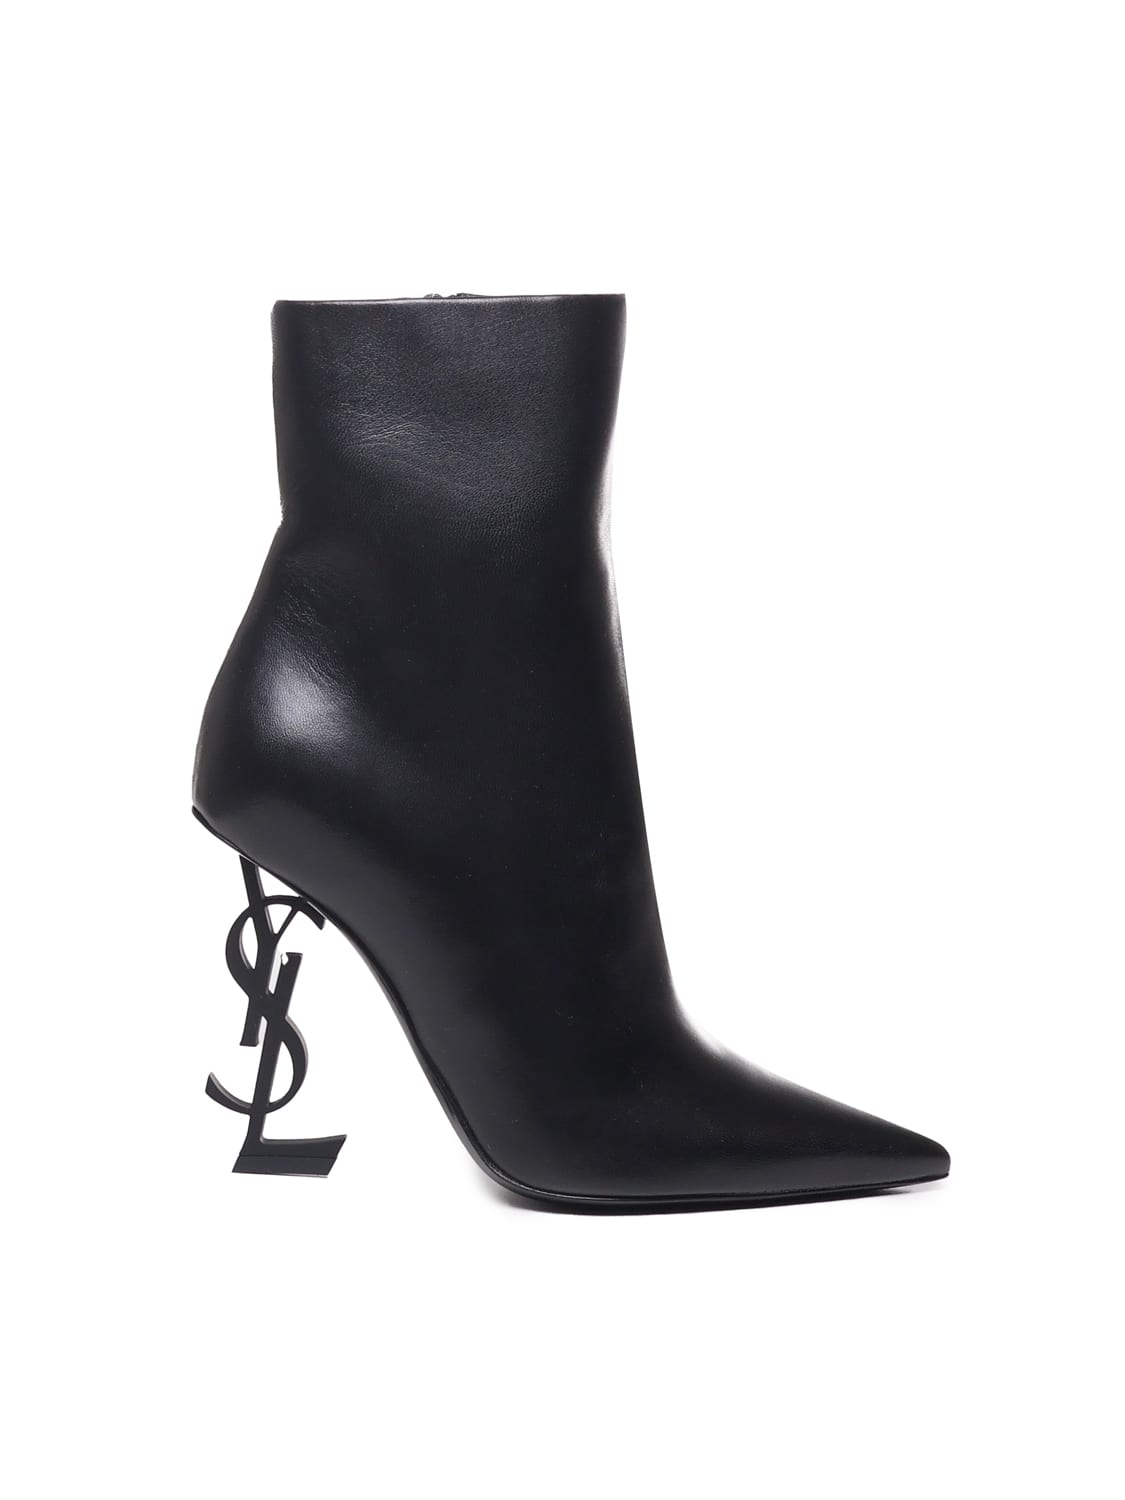 SAINT LAURENT OPYUM ANKLE BOOTS IN CALFSKIN